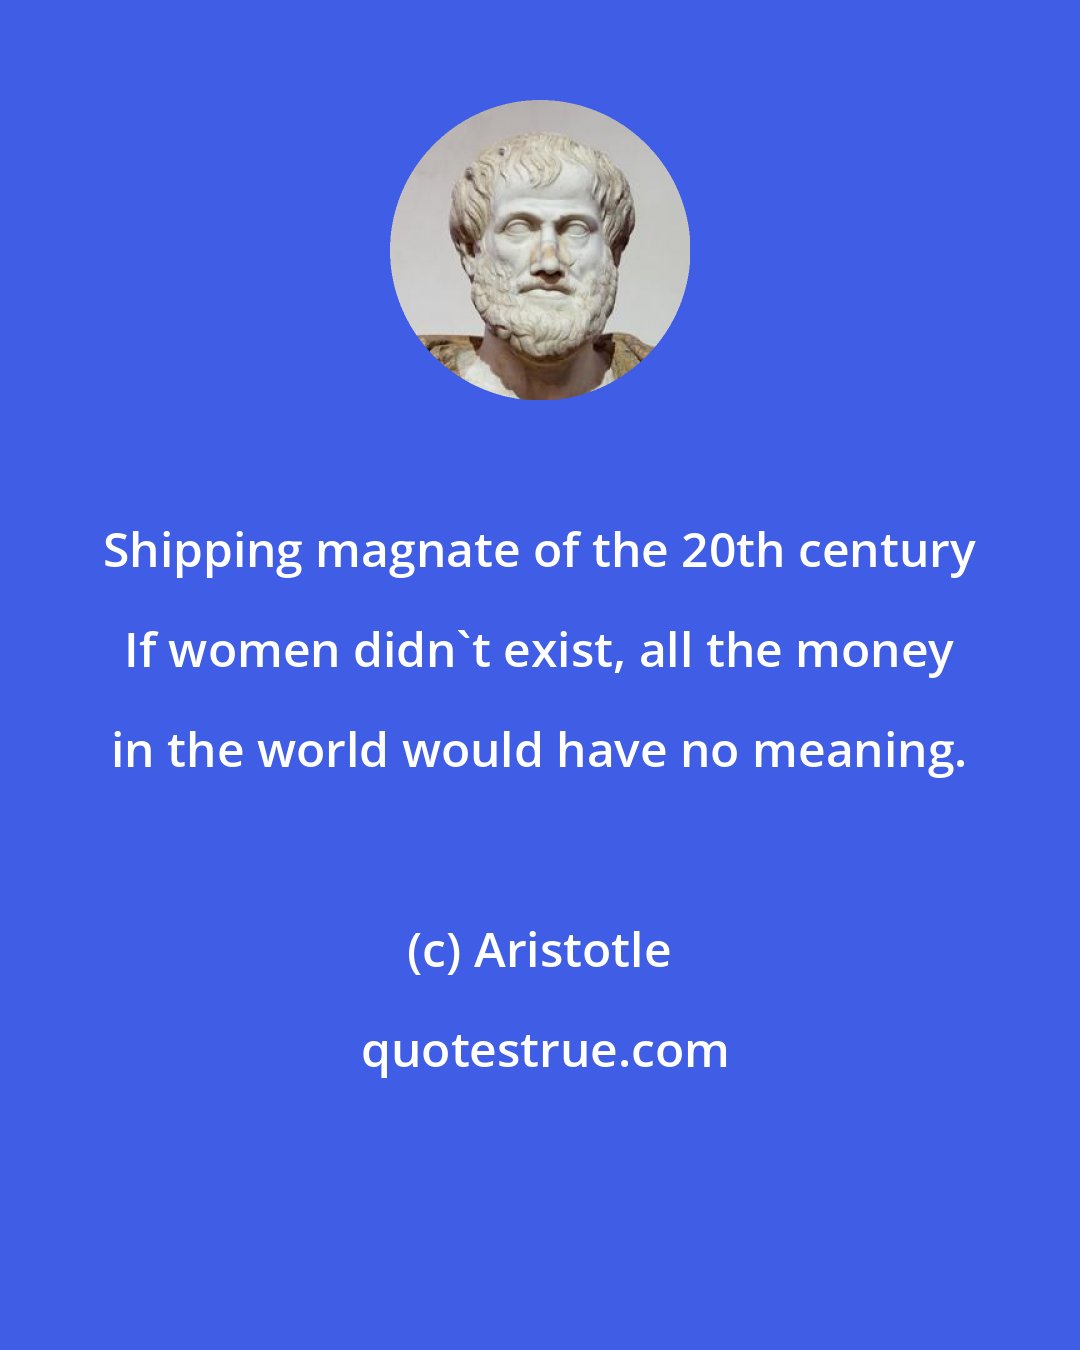 Aristotle: Shipping magnate of the 20th century If women didn't exist, all the money in the world would have no meaning.